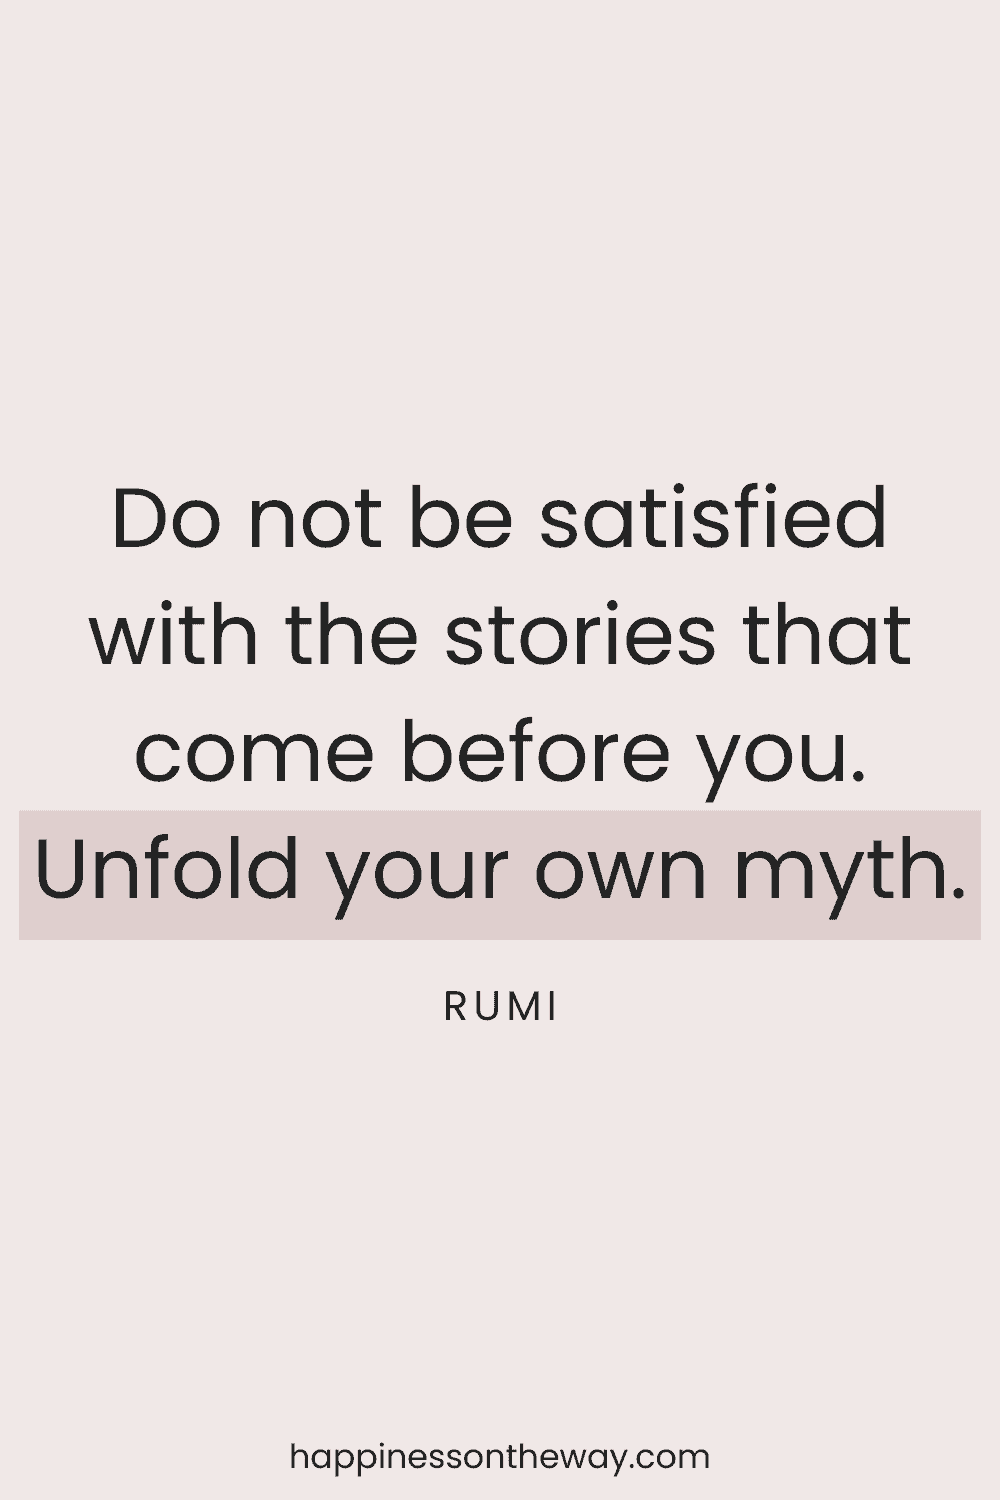 Inspirational Rumi quote 'Do not be satisfied with the stories that come before you. Unfold your own myth.' presented in a bold, contemporary style against a plain background